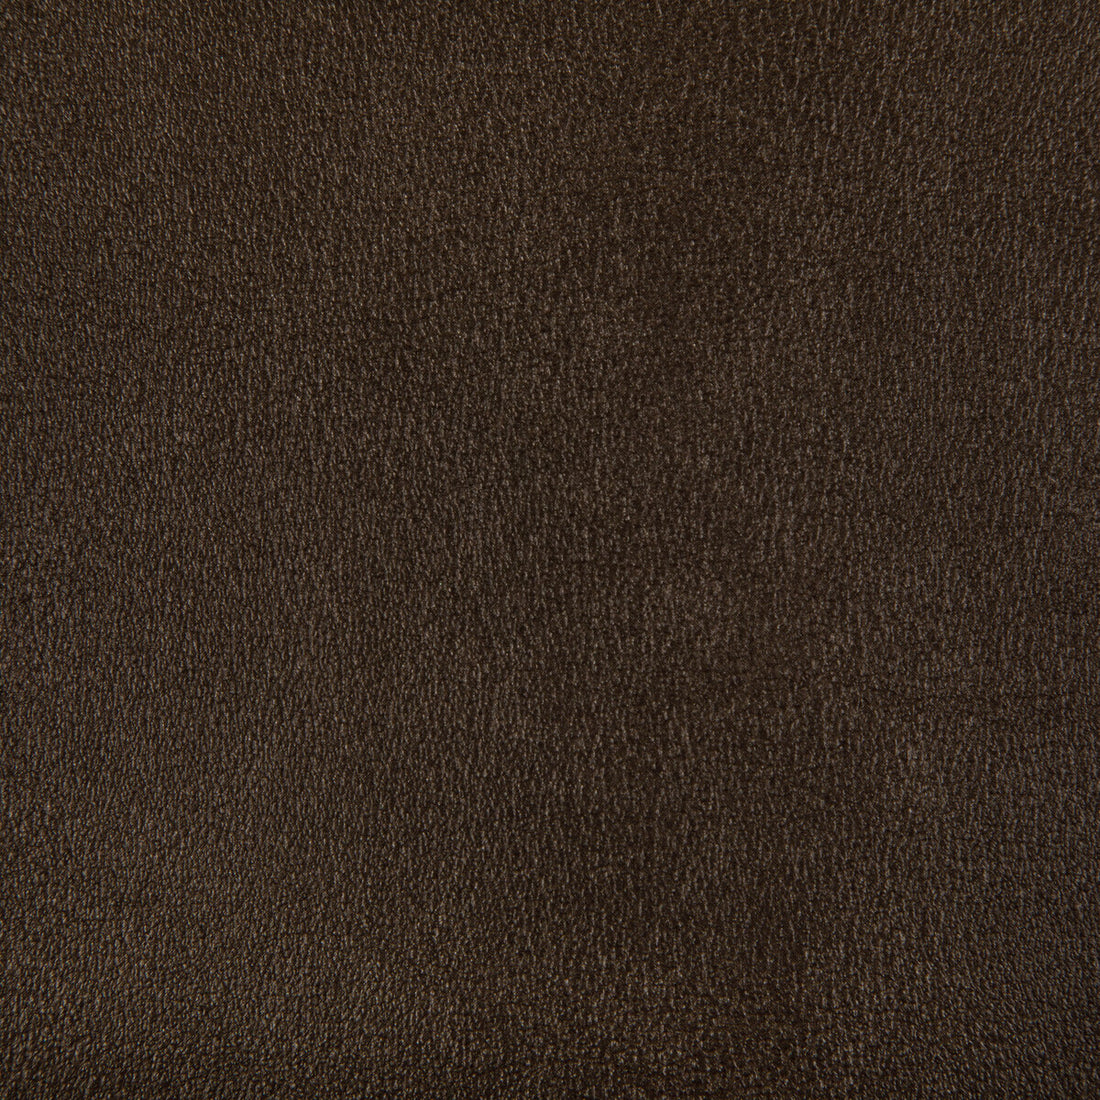 Agatha fabric in bronze color - pattern AGATHA.624.0 - by Kravet Contract